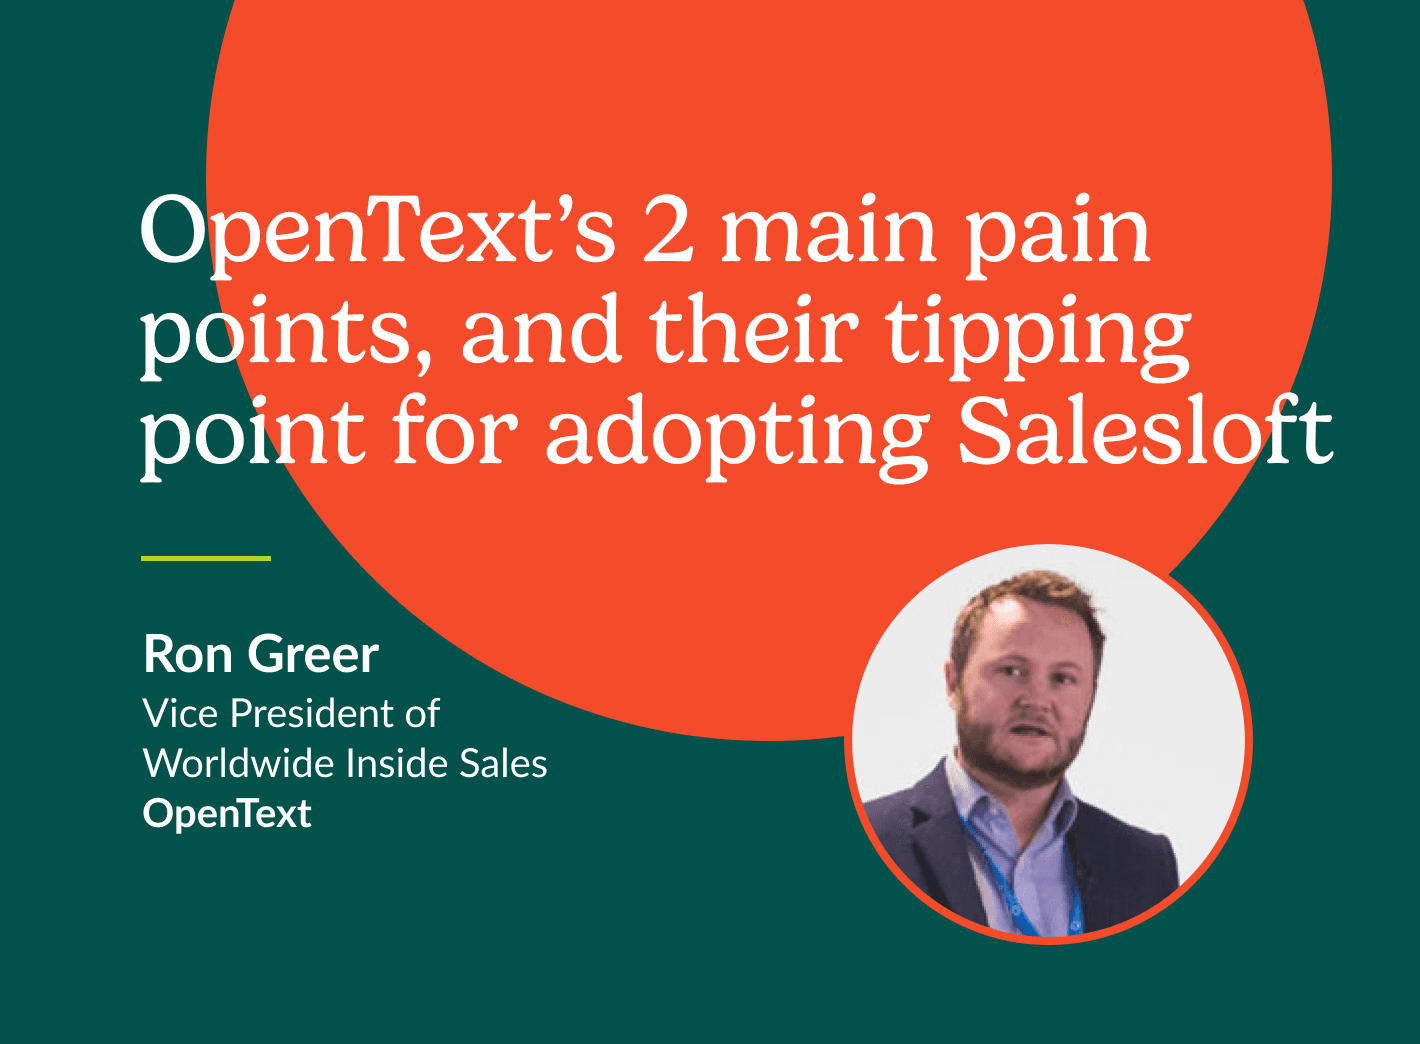 OpenText's 2 main pain points and their tipping point to adopting Salesloft